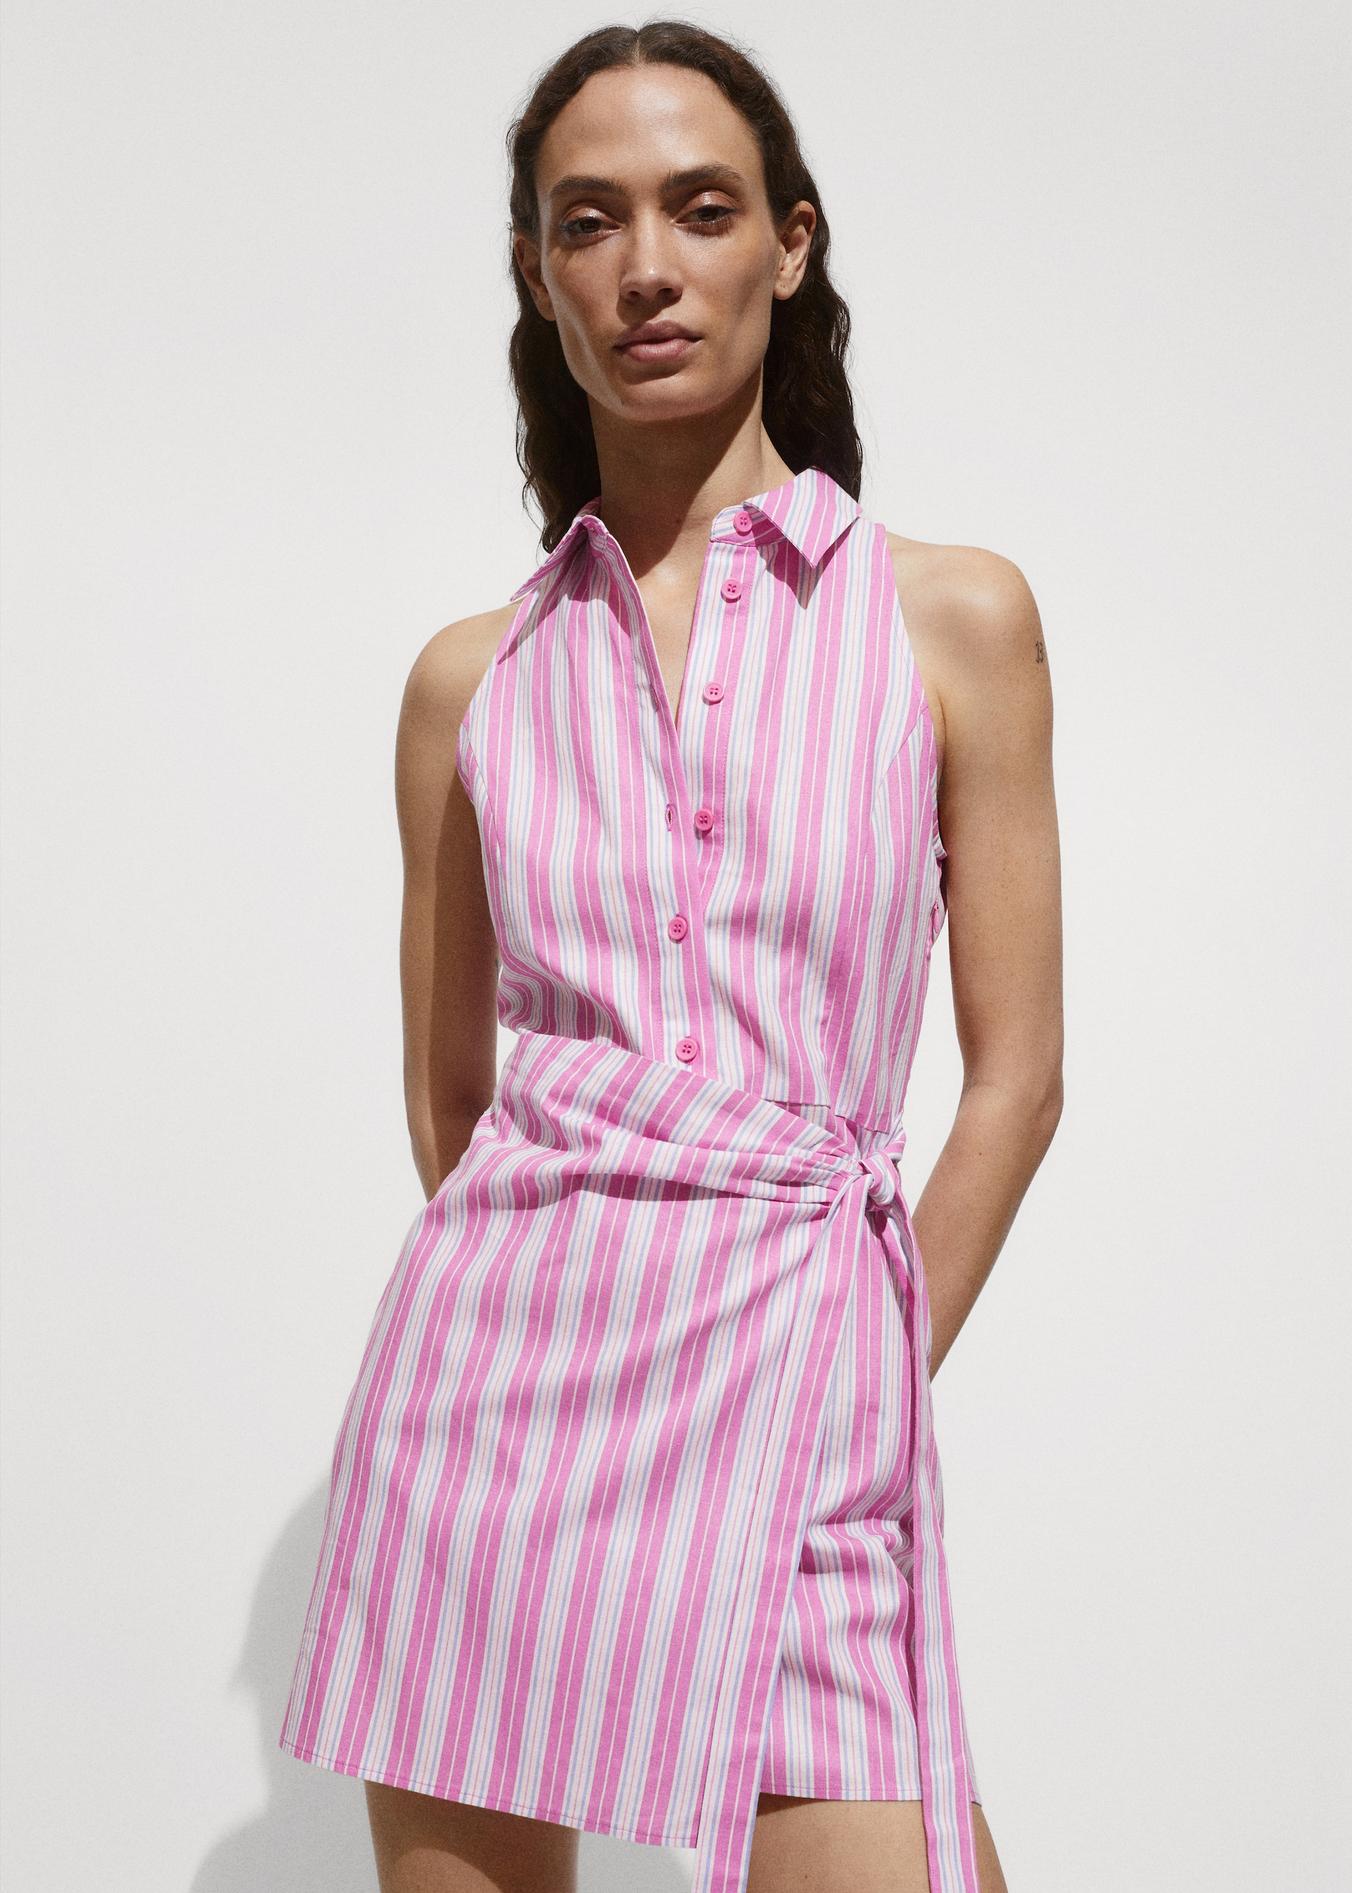 Wrap shirt dress offers at S$ 49.9 in HE by Mango